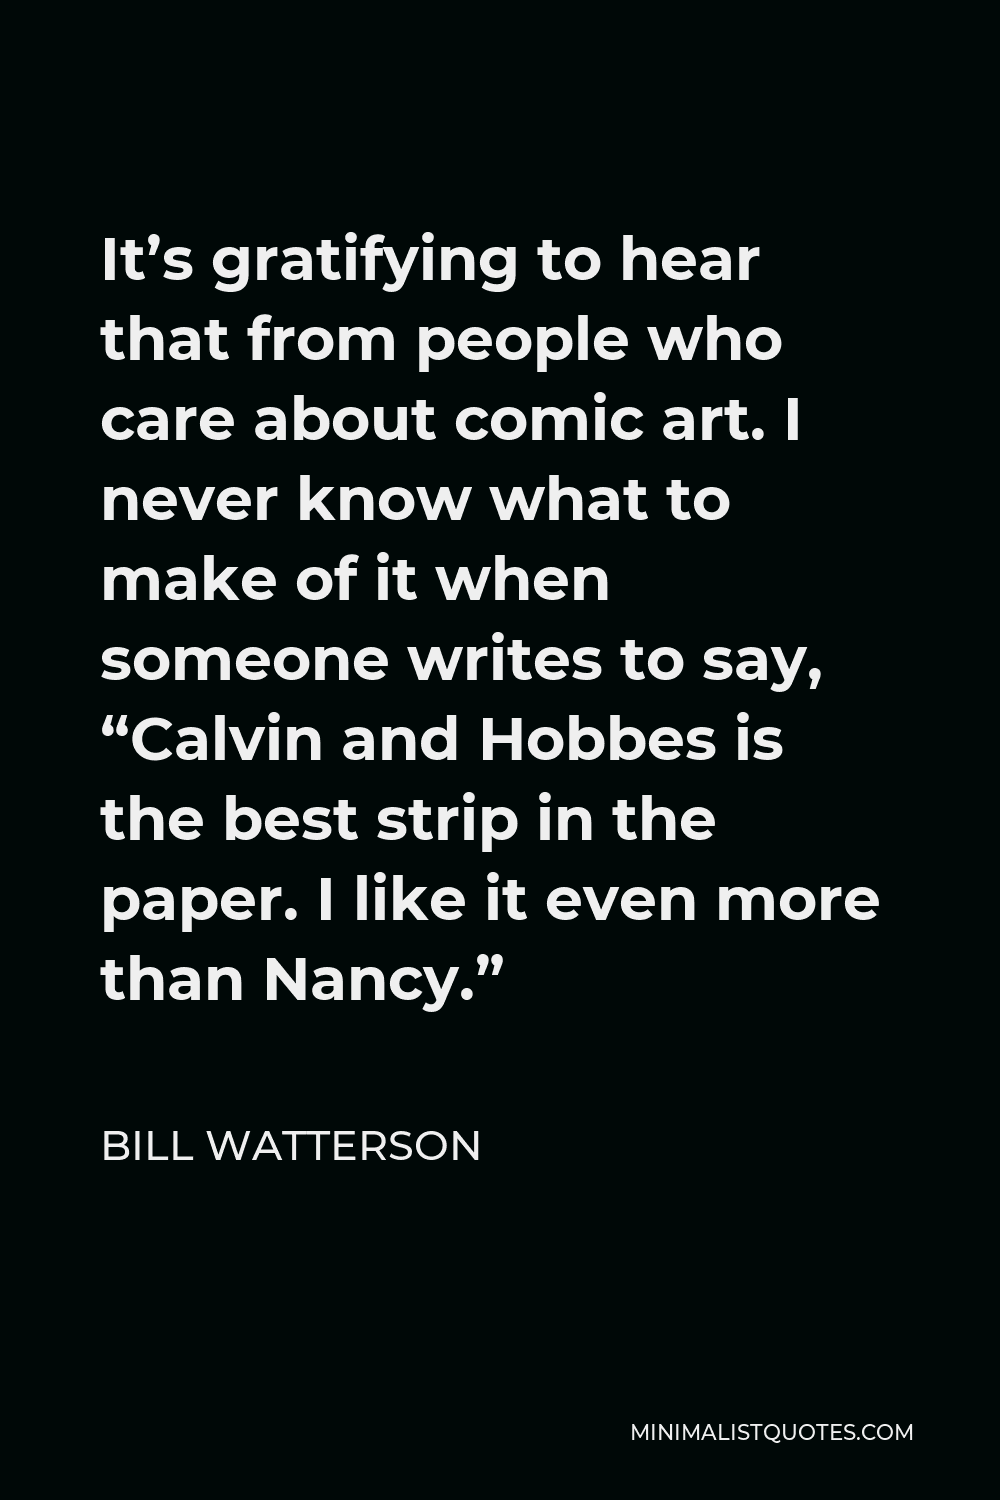 Bill Watterson Quote - It’s gratifying to hear that from people who care about comic art. I never know what to make of it when someone writes to say, “Calvin and Hobbes is the best strip in the paper. I like it even more than Nancy.”